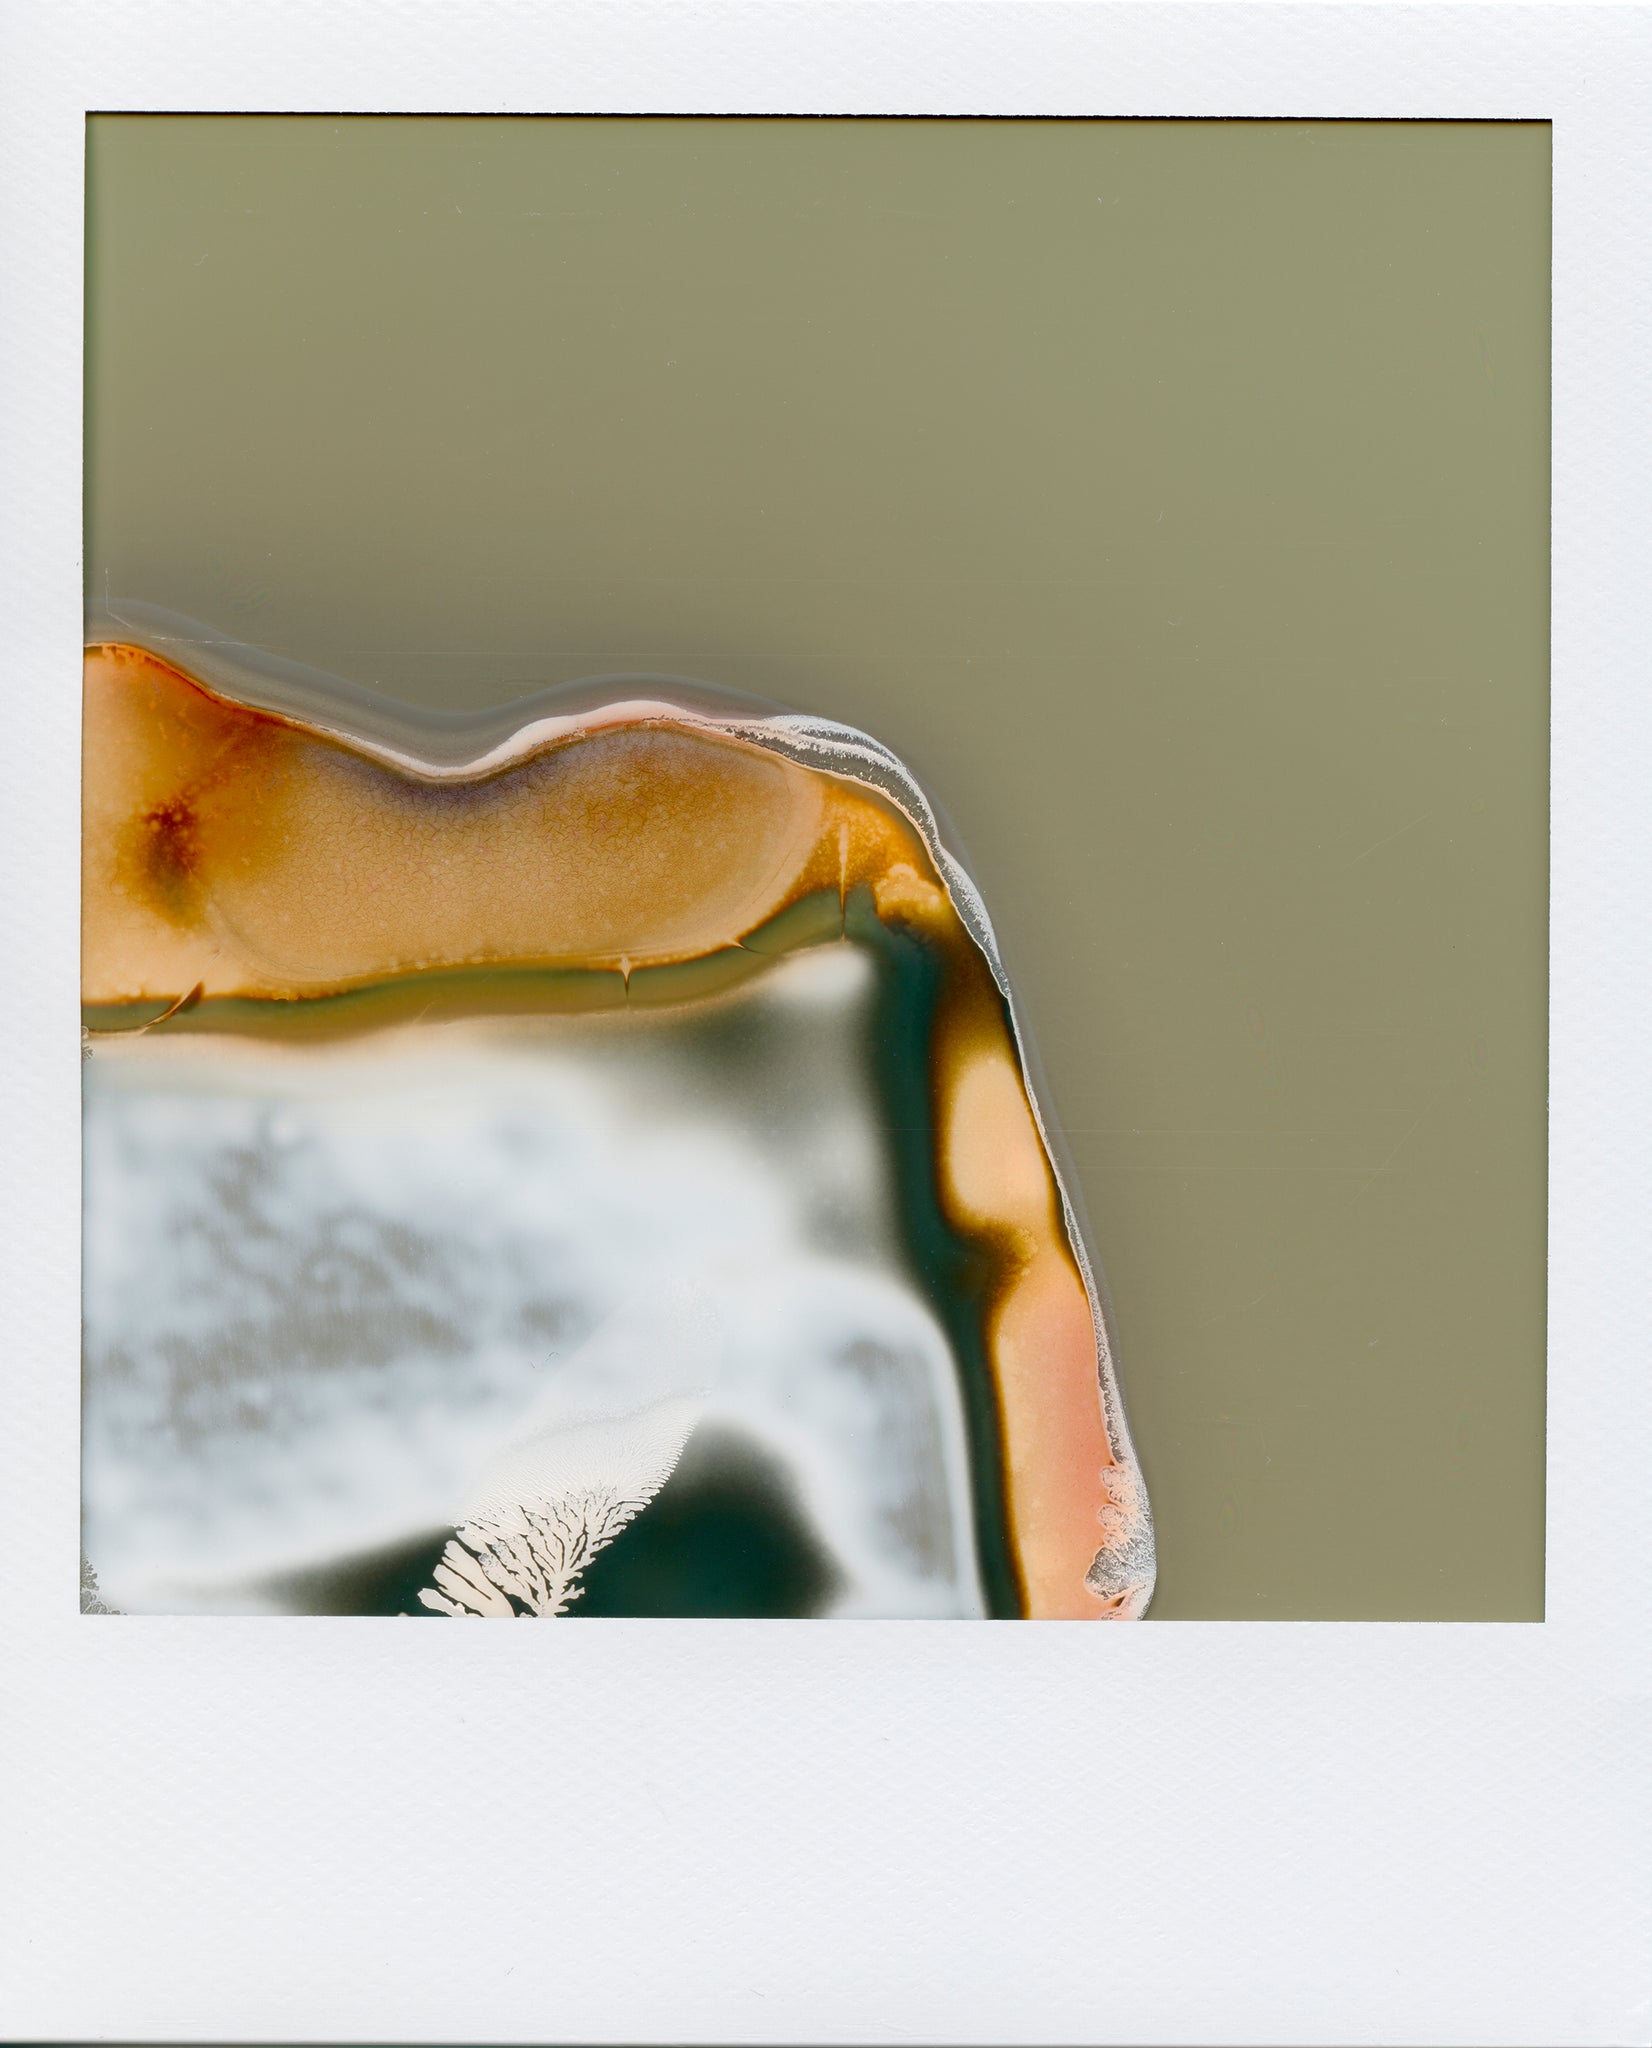 Rebecca Hackemann, "Untitled 4 (from the Post Polaroids series)" SOLD